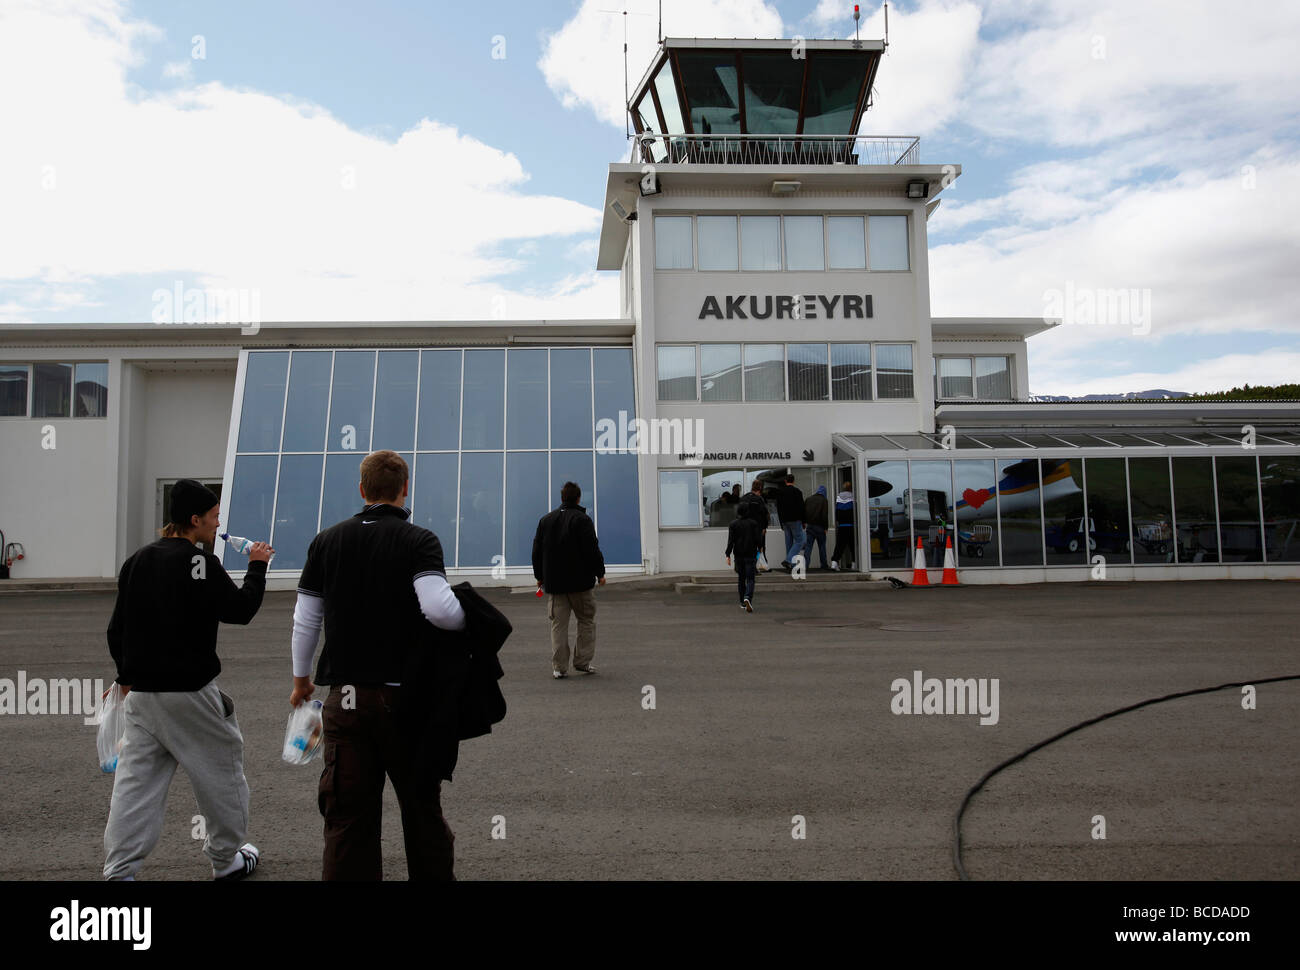 Passengers arriving to the terminal at the airport in Akureyri, Iceland Stock Photo